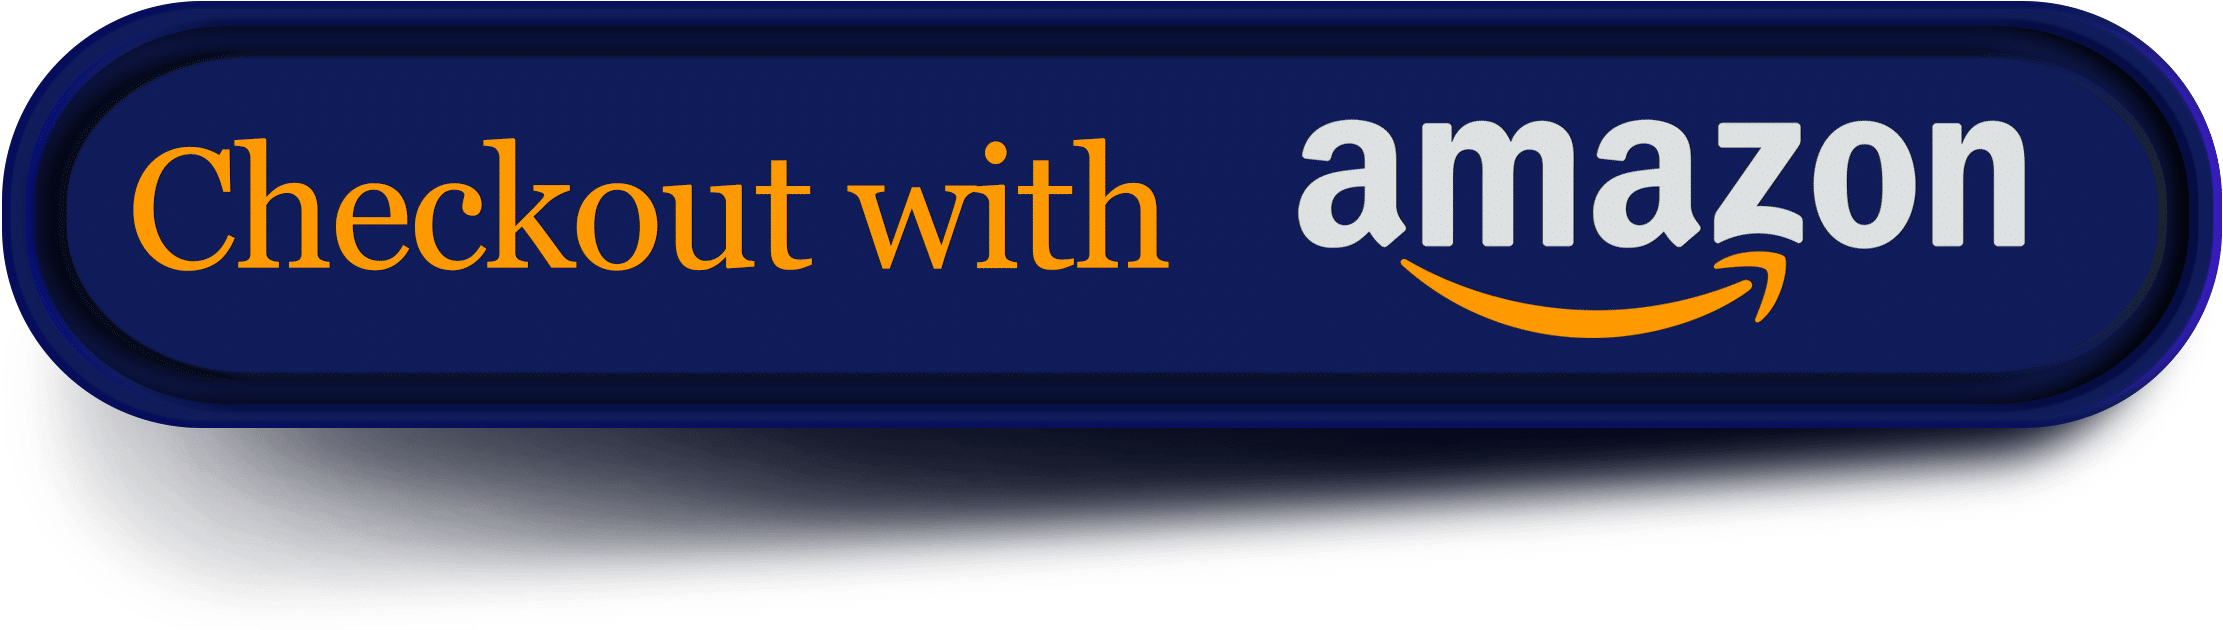 Checkout with Amazon